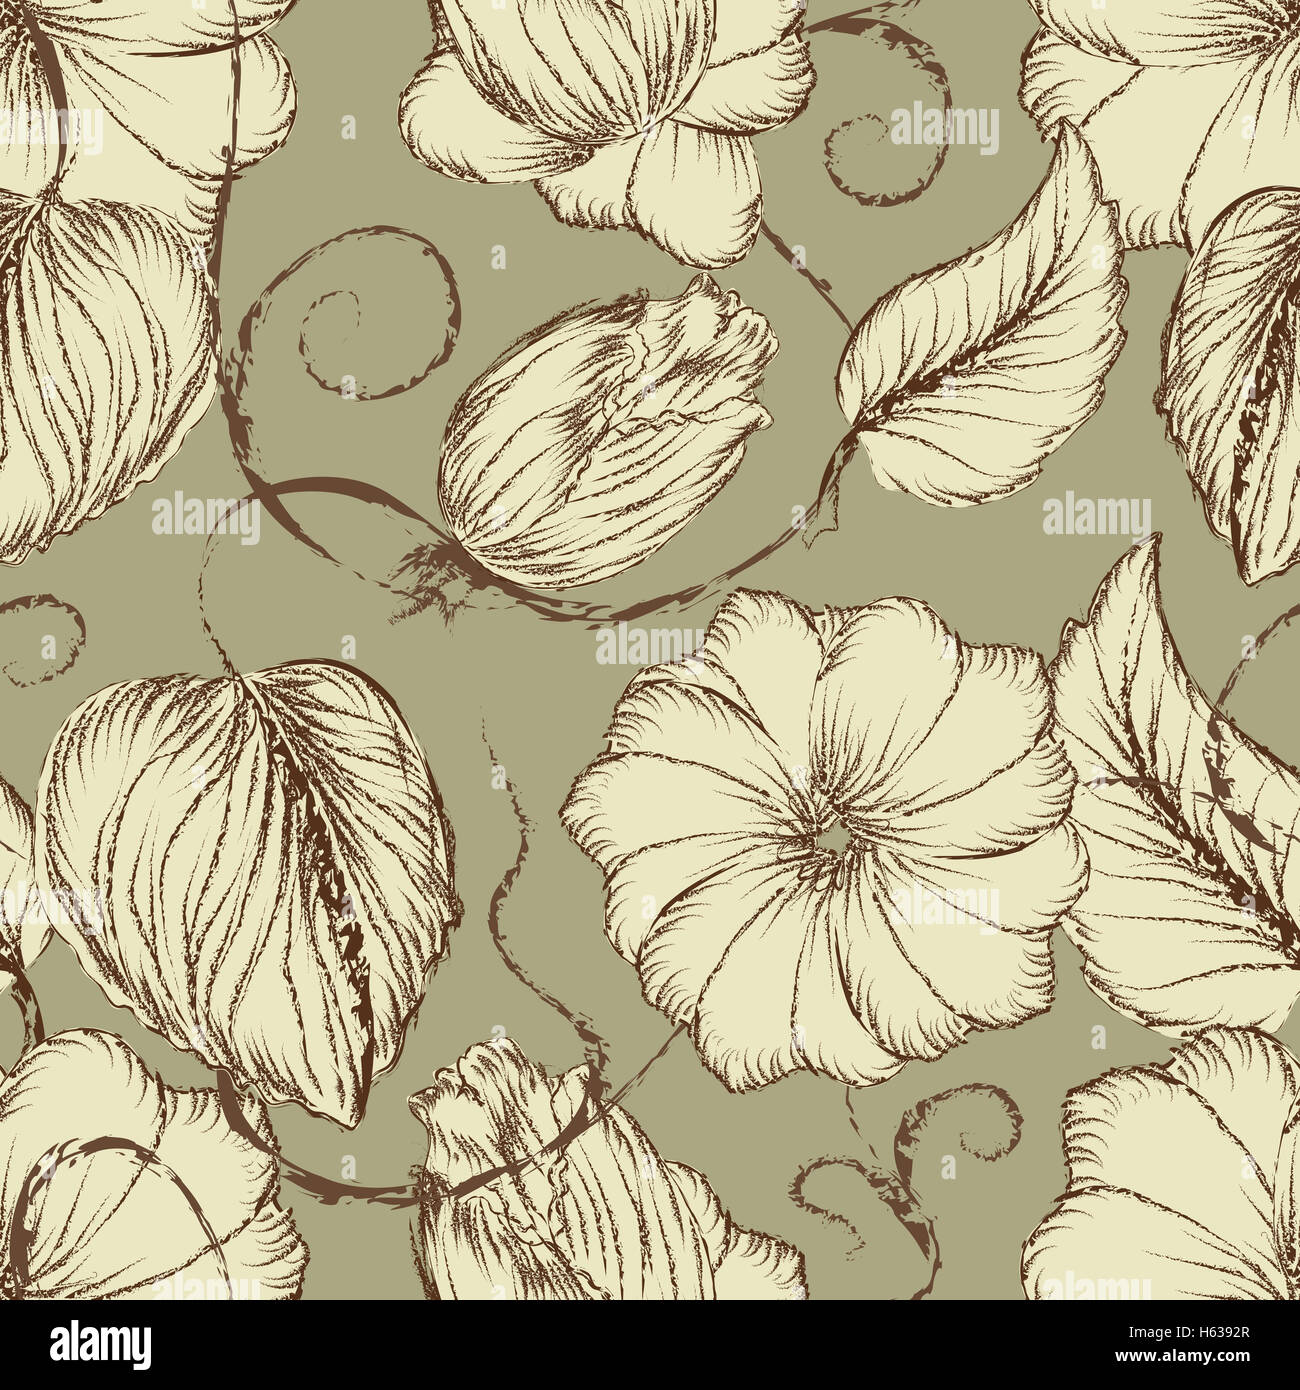 Hand drawn pattern with flowers and leaves Stock Photo